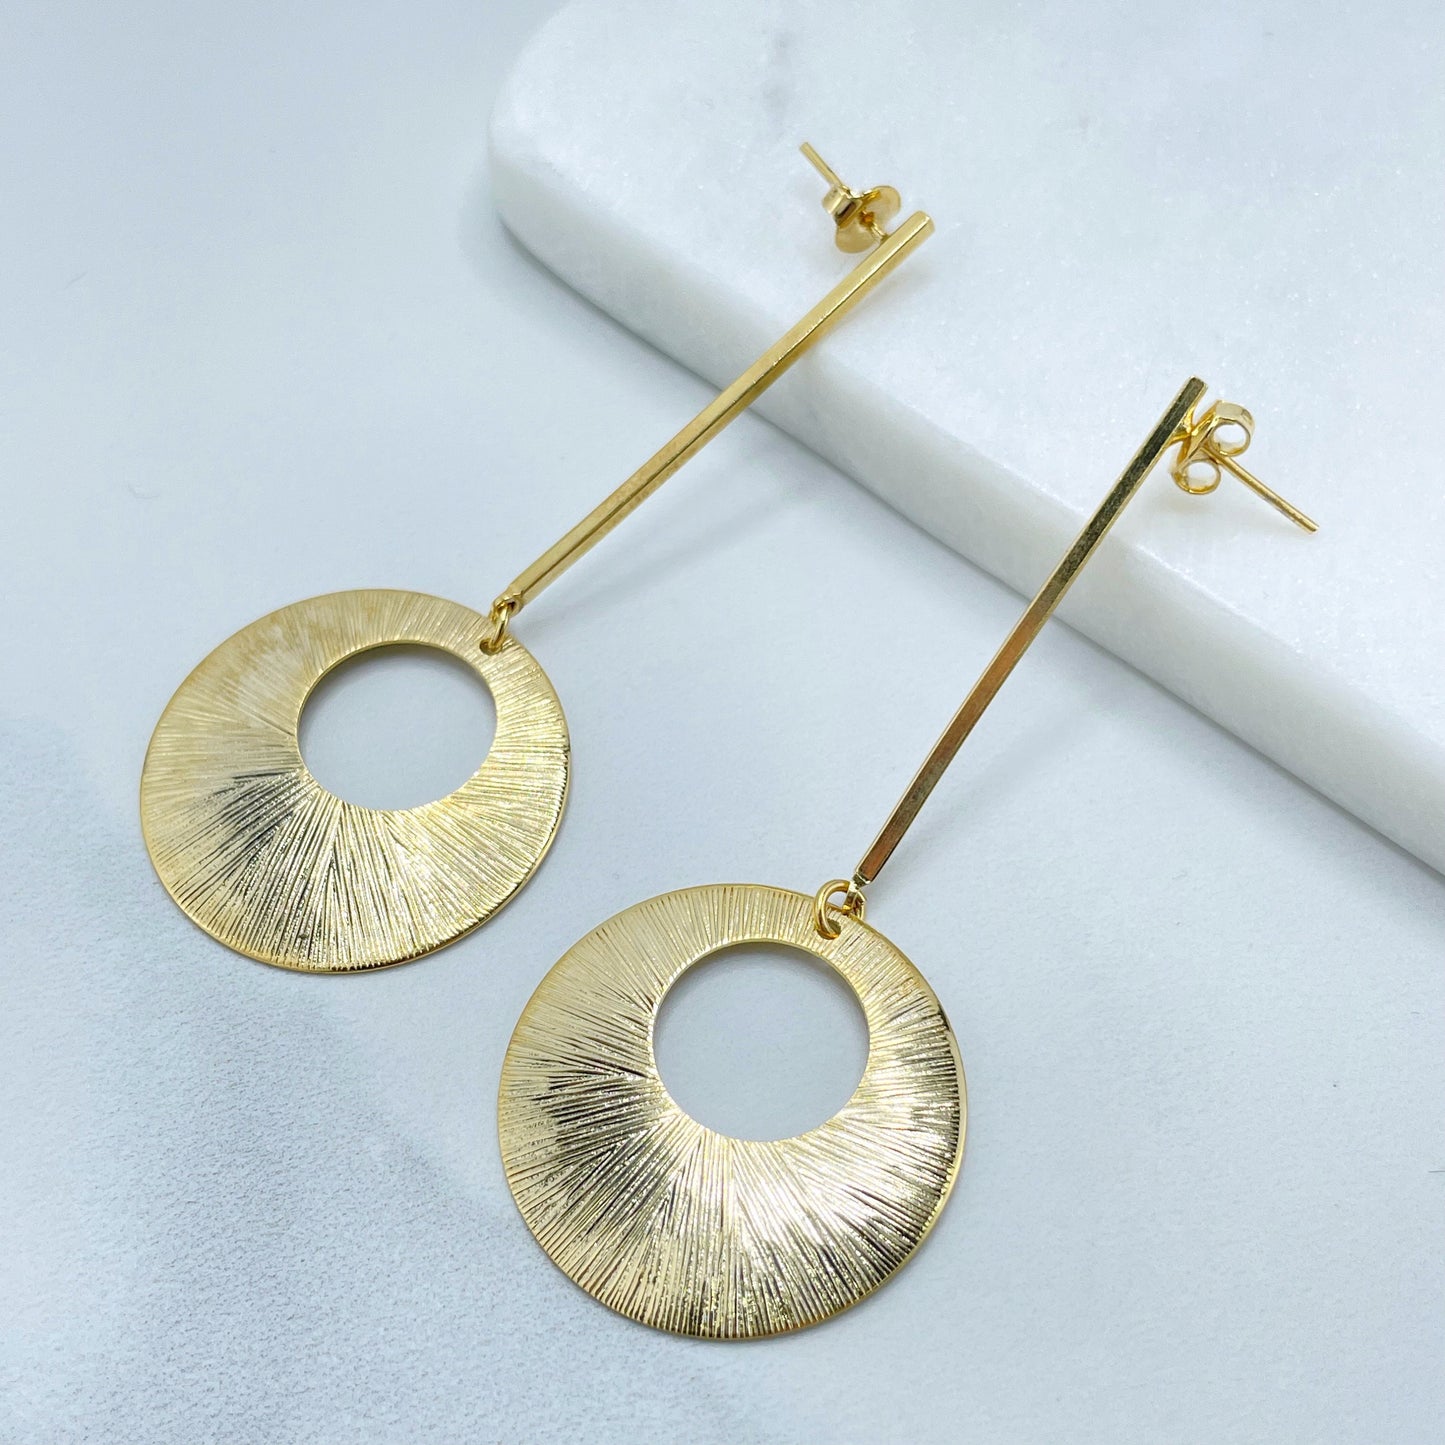 18k Gold Filled Long Drop Earrings with Texturized Cutout Circle, Minimalist Jewelry, Wholesale Jewelry Making Supplies